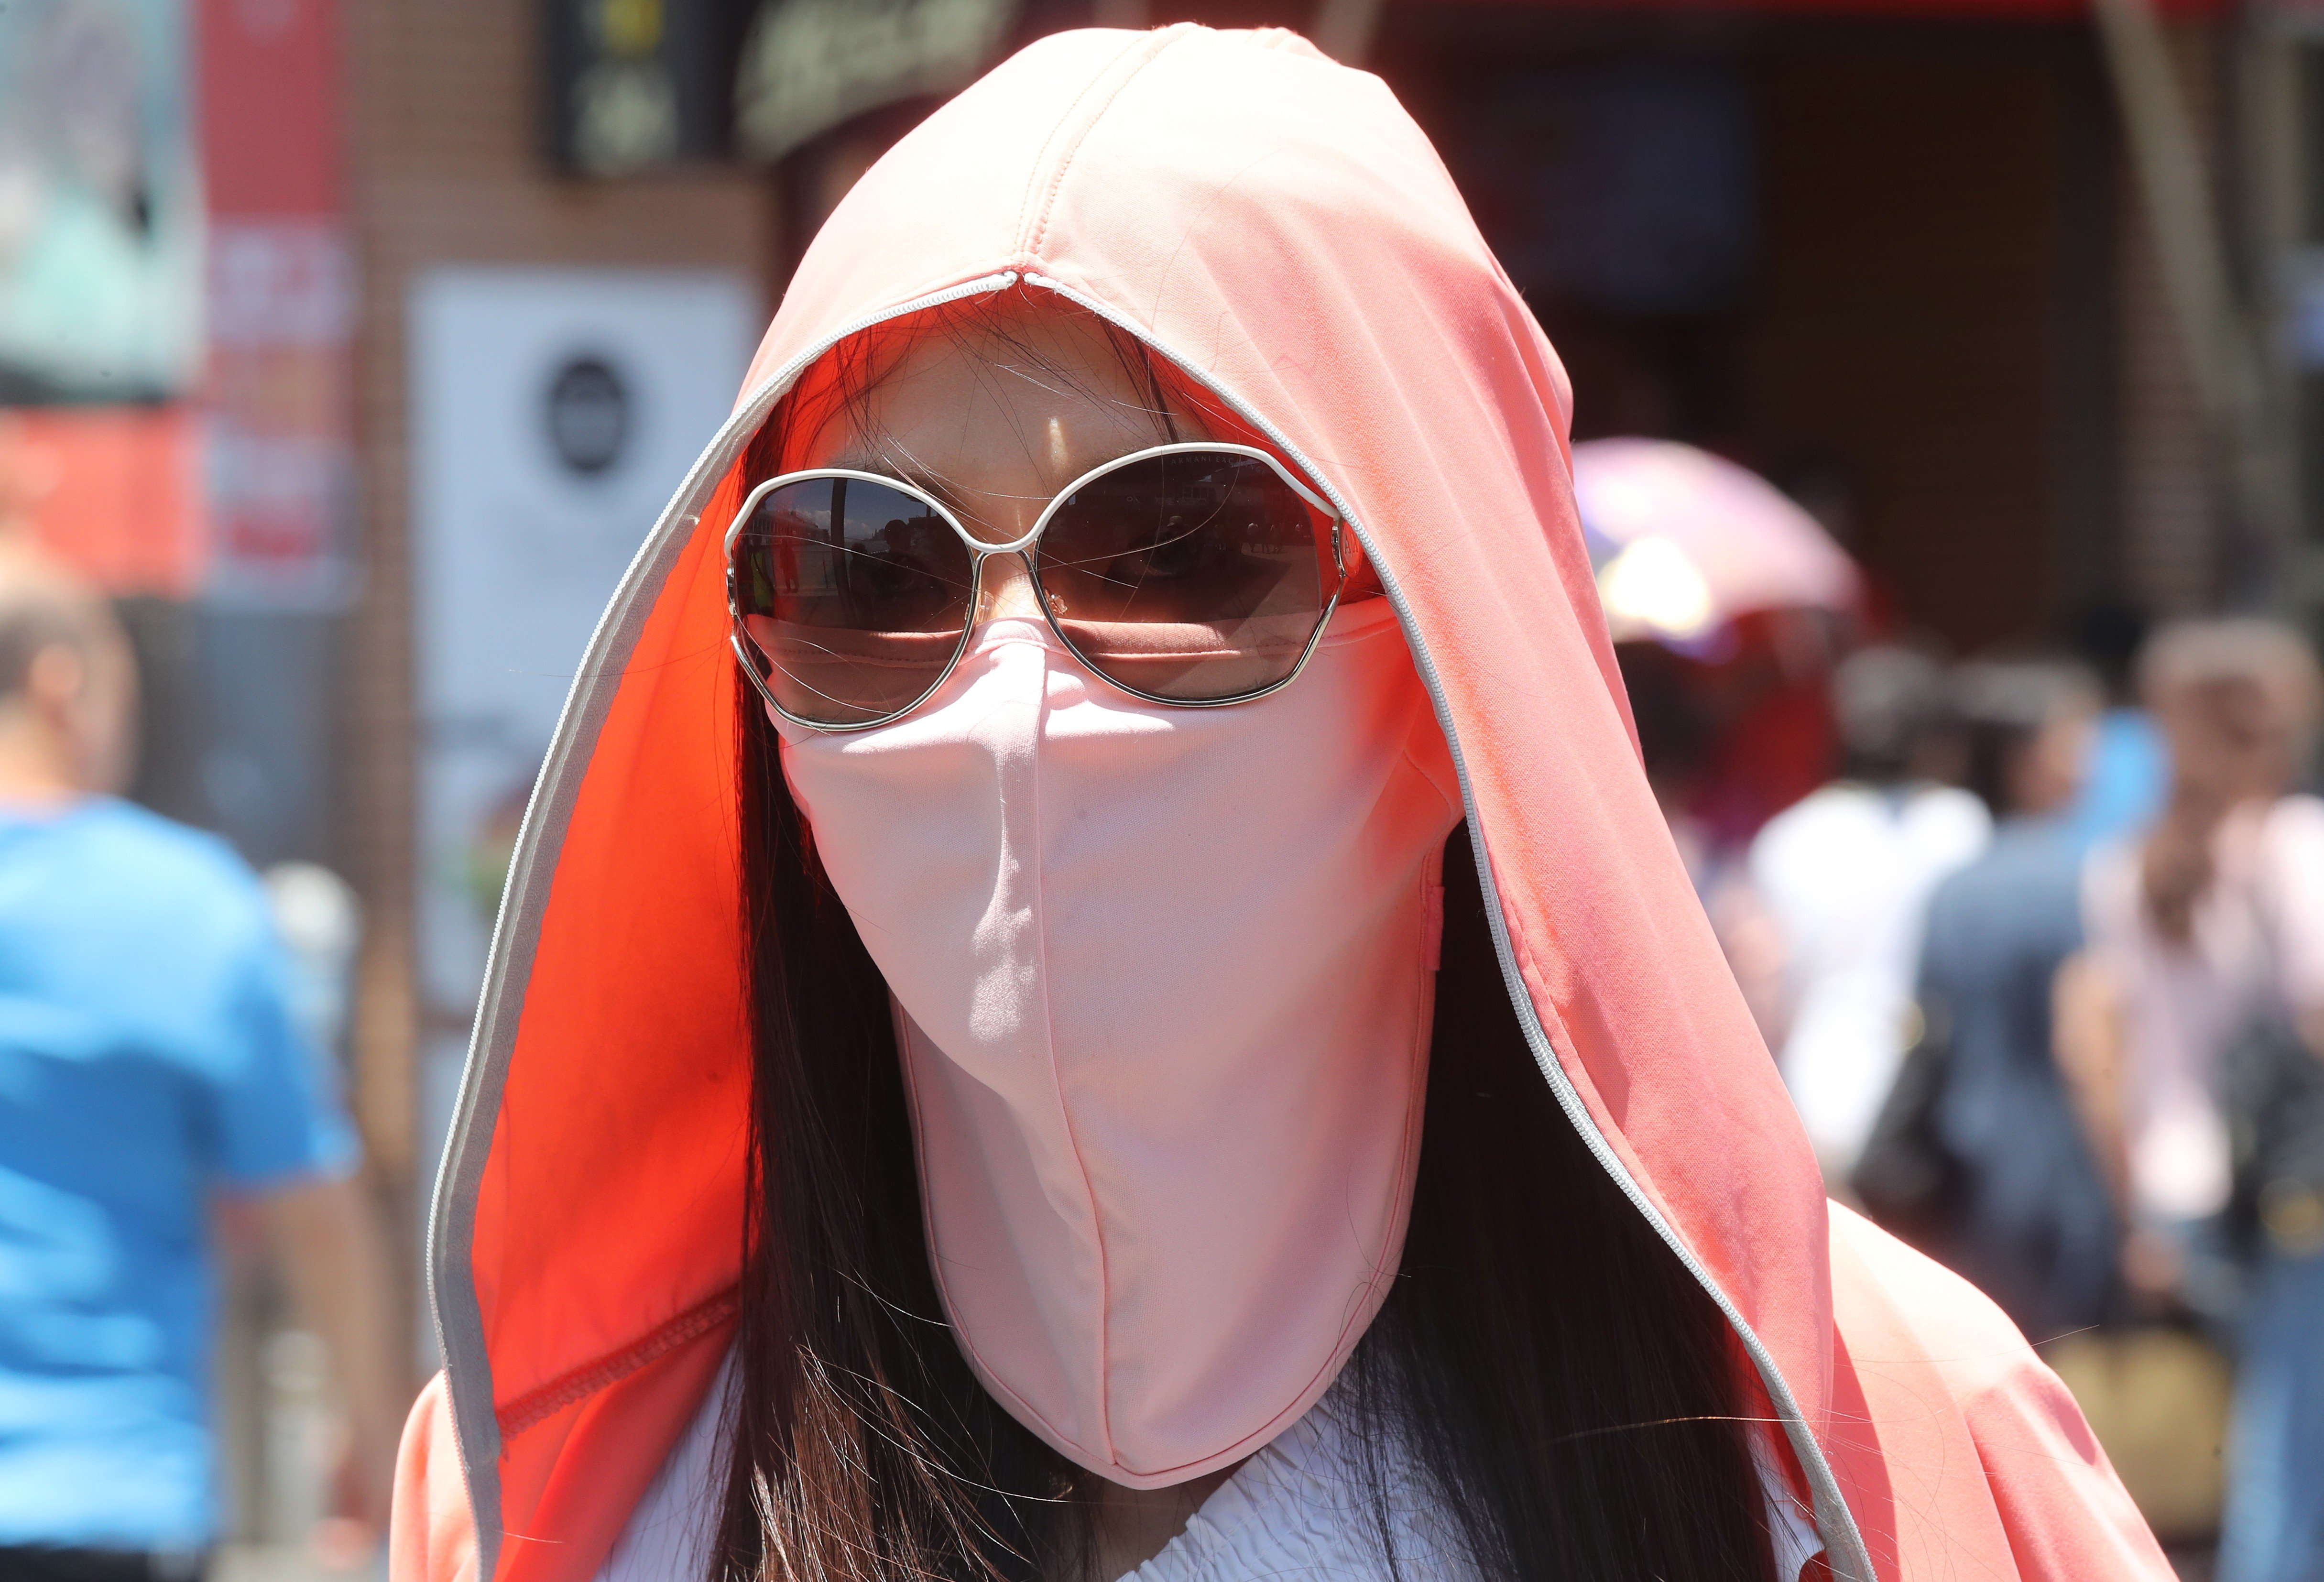 A woman covers up to protect herself from the sun in Tsim Sha Tsui, Hong Kong. Photo: K.Y. Cheng